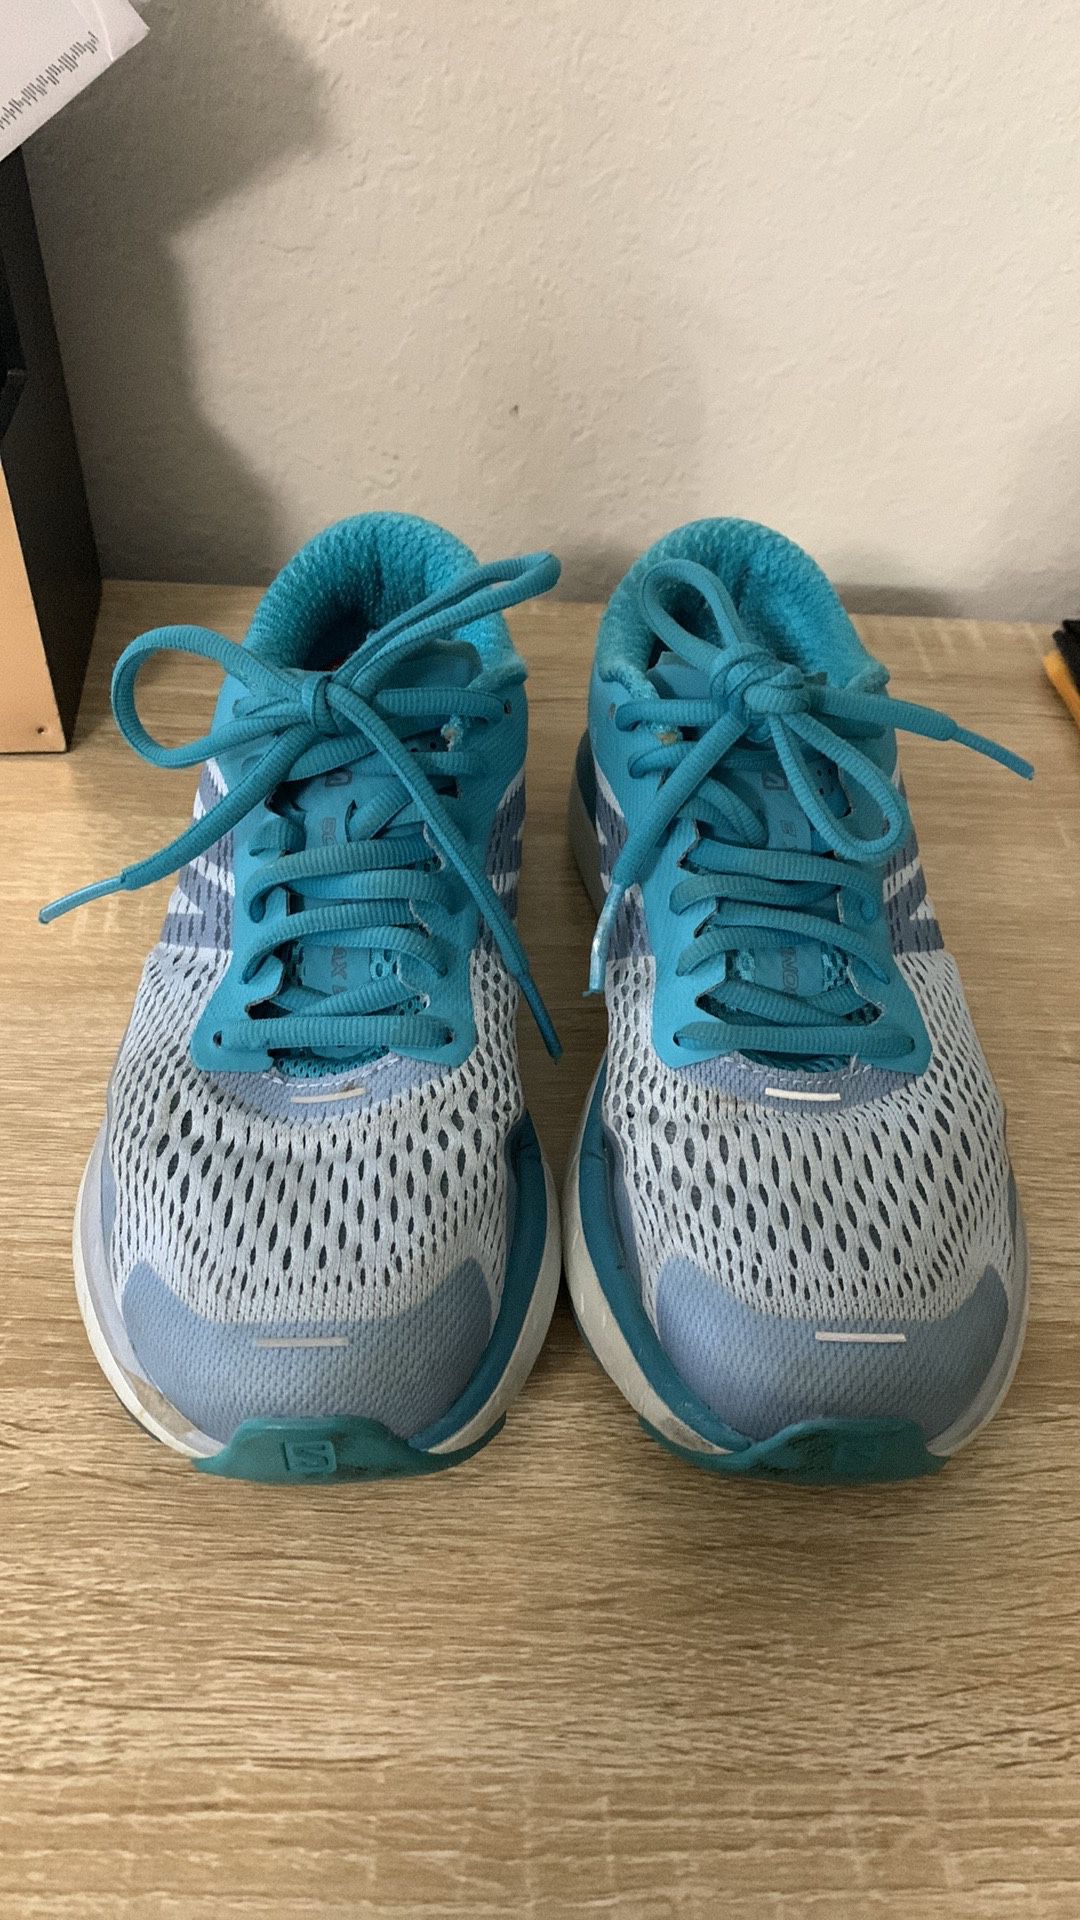 Salomon Sonic RA max2 running shoes women's size 7 for Sale in Orlando, FL OfferUp